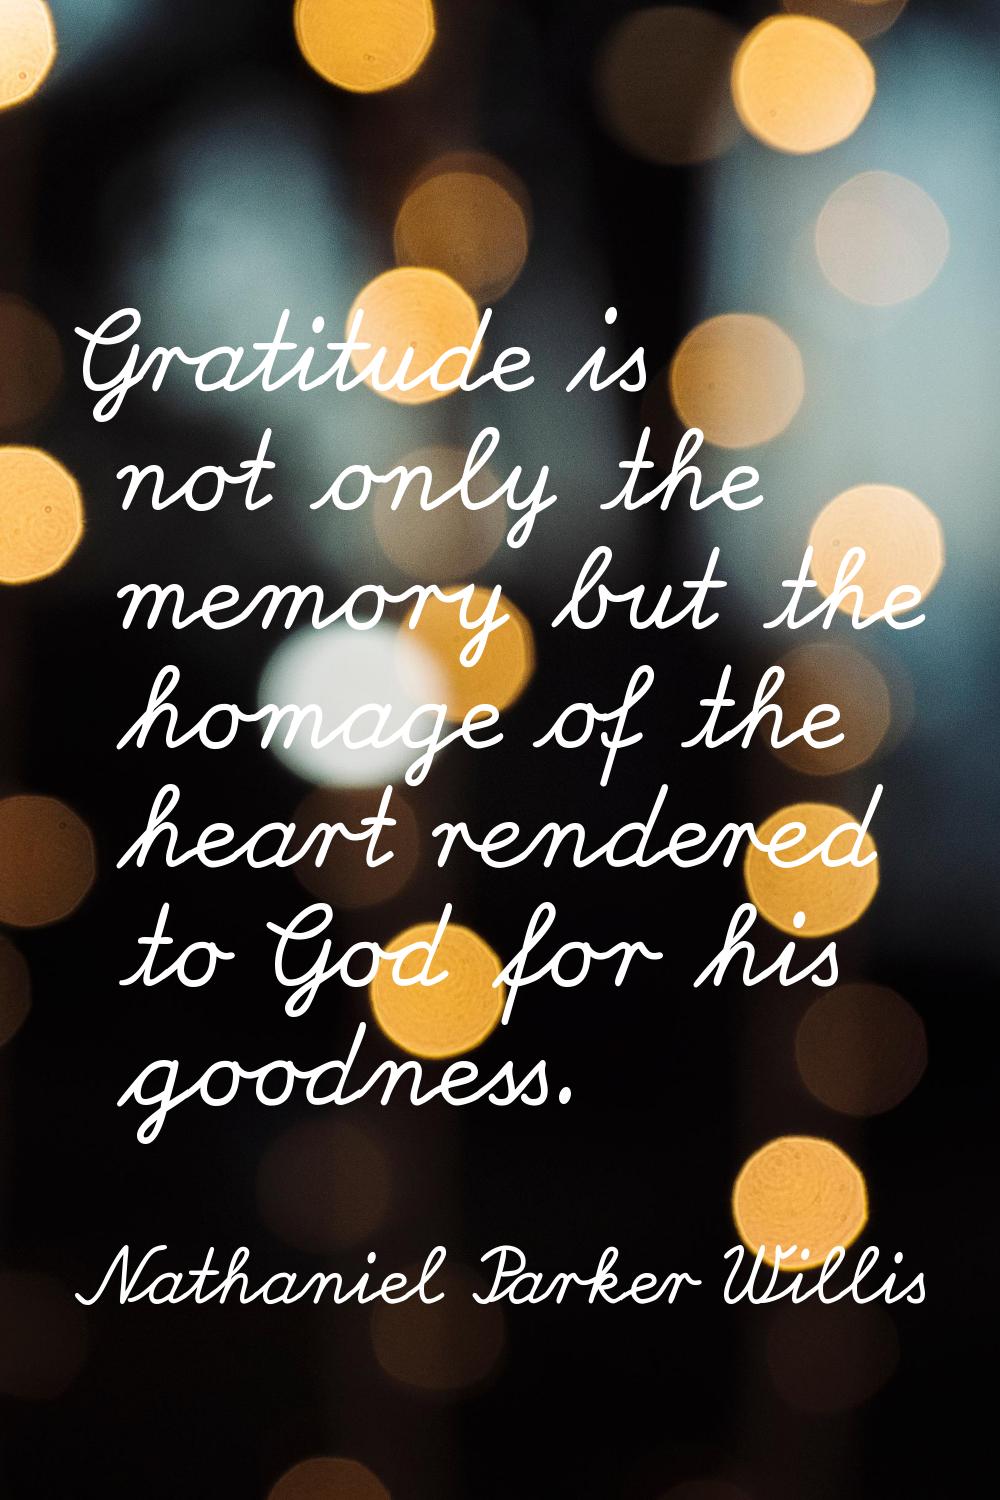 Gratitude is not only the memory but the homage of the heart rendered to God for his goodness.